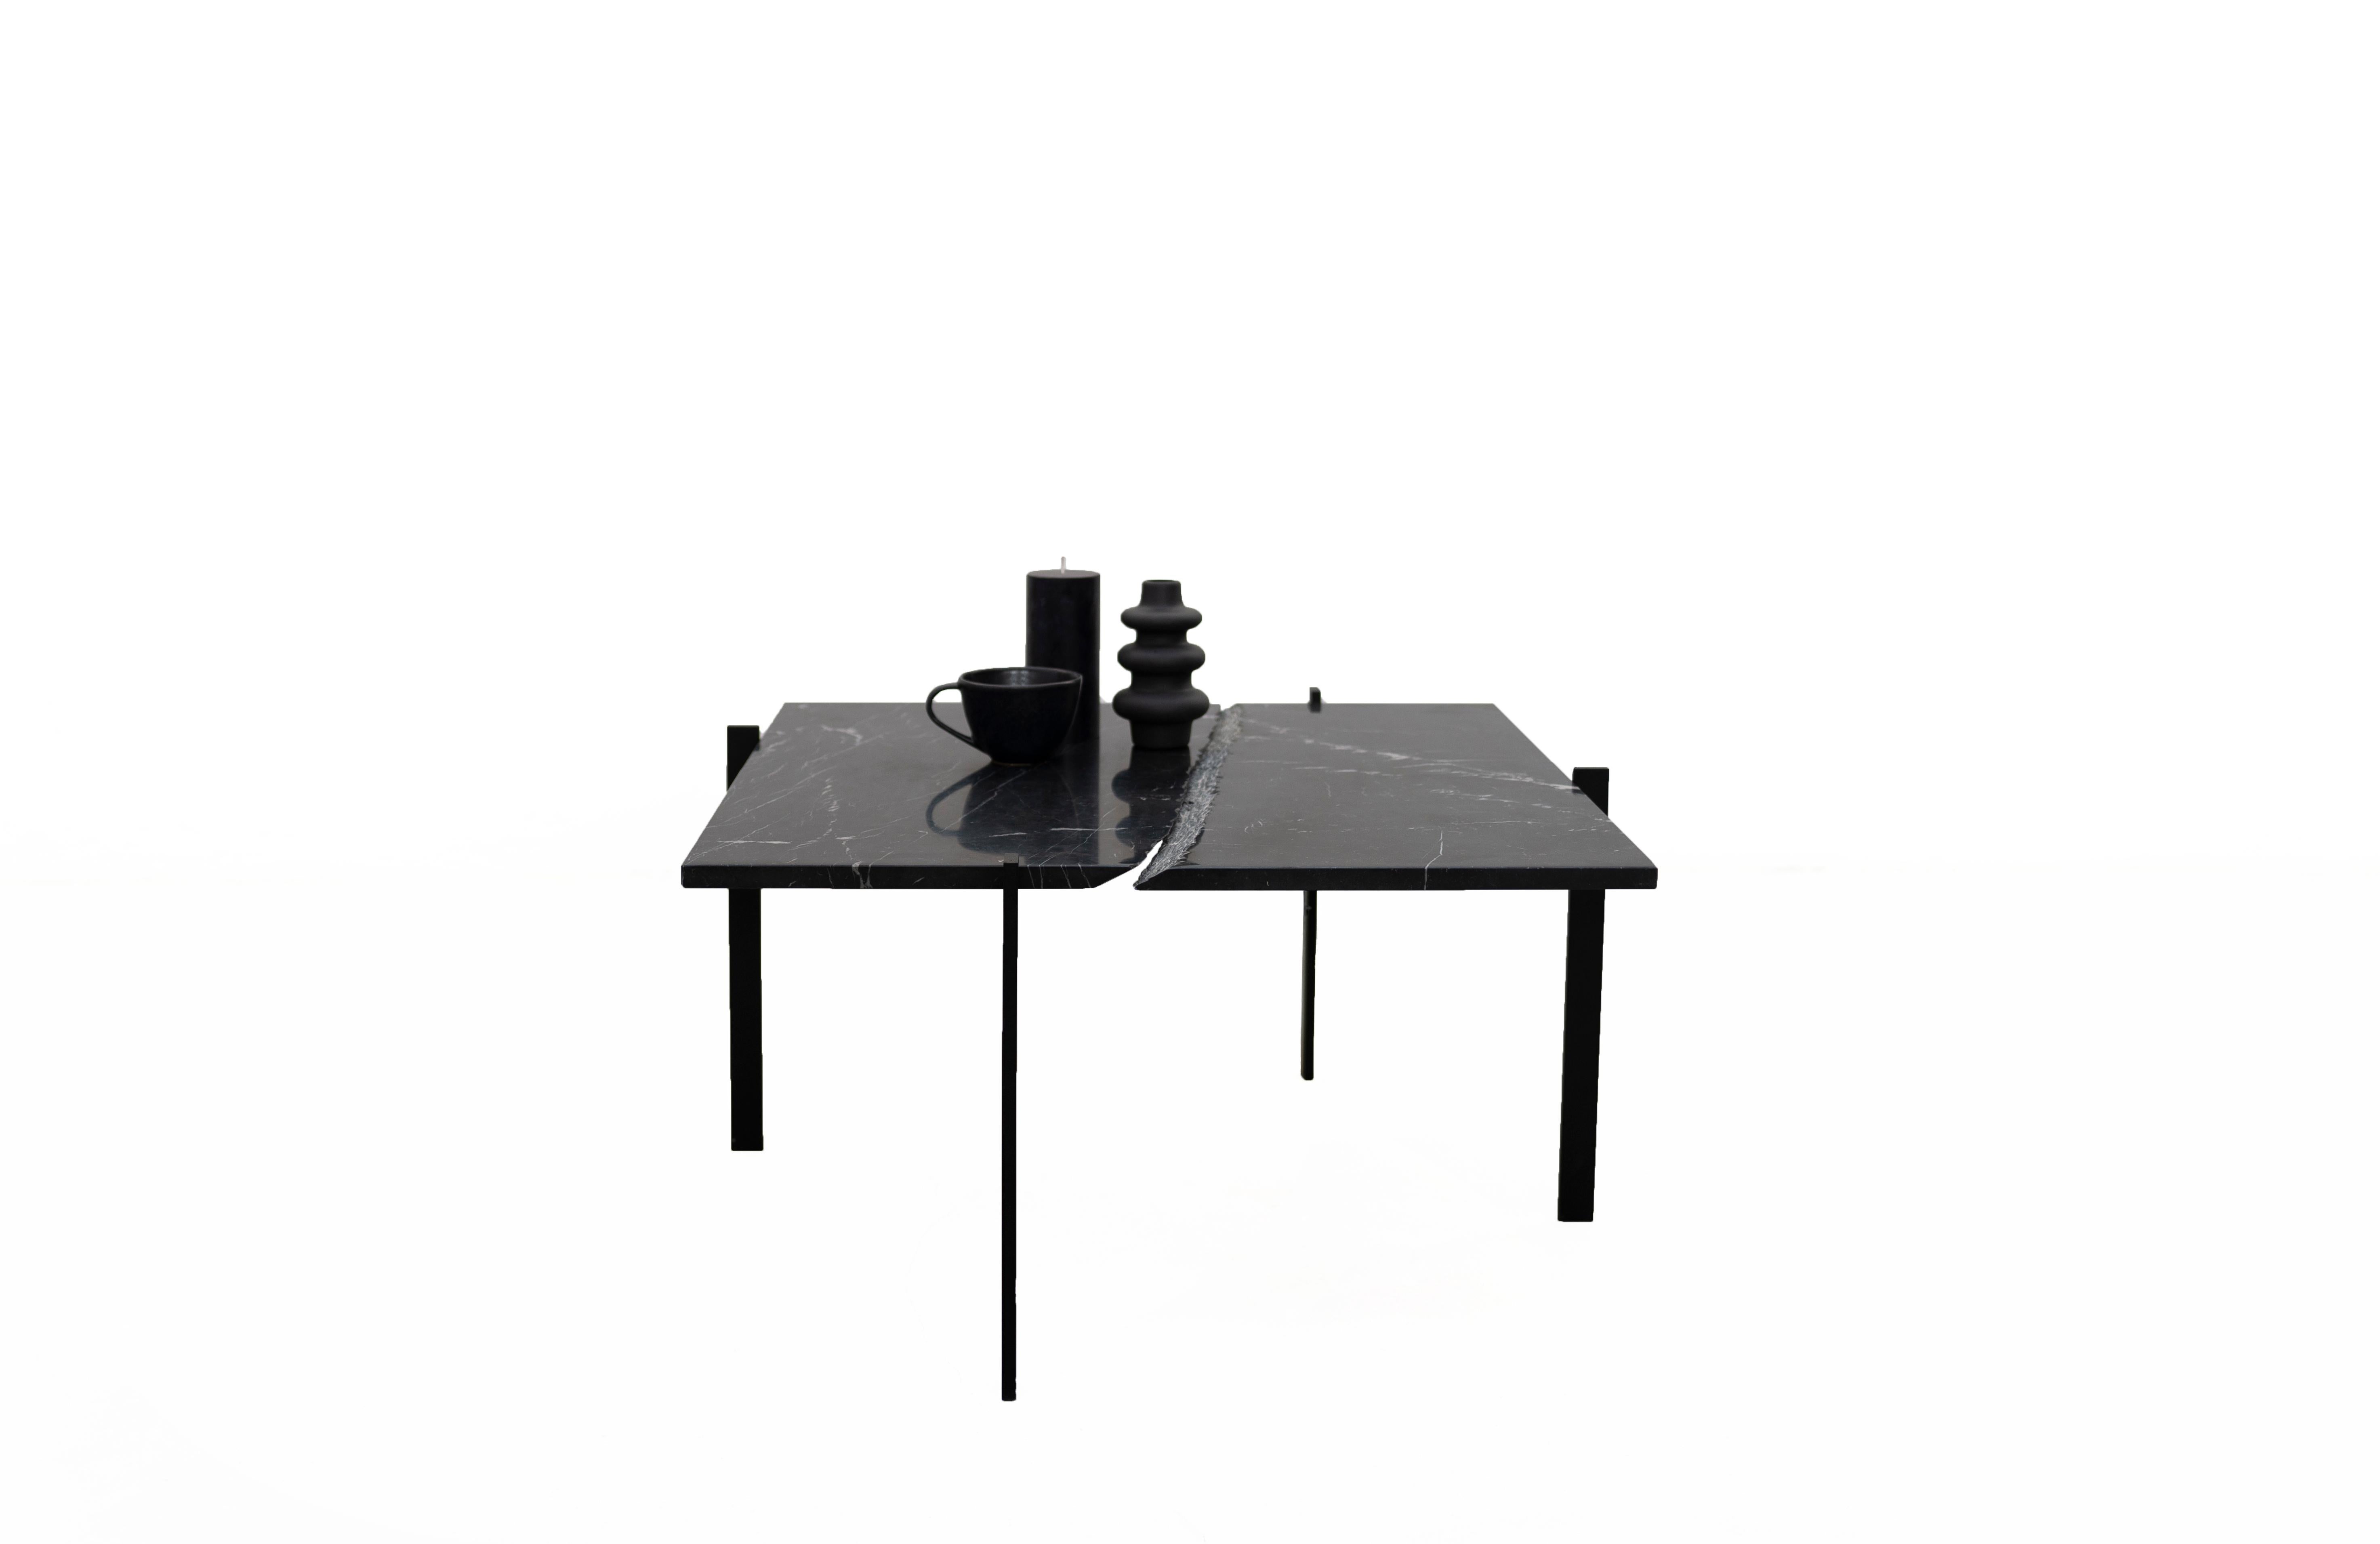 Object 019 center table by NG design.
Dimensions: D 77 x W 77 x H 40 cm.
Materials: powder coated steel, marble, nero marquina.

Also available: All of objects available in different materials and colors on demand. 

Do you like breaking